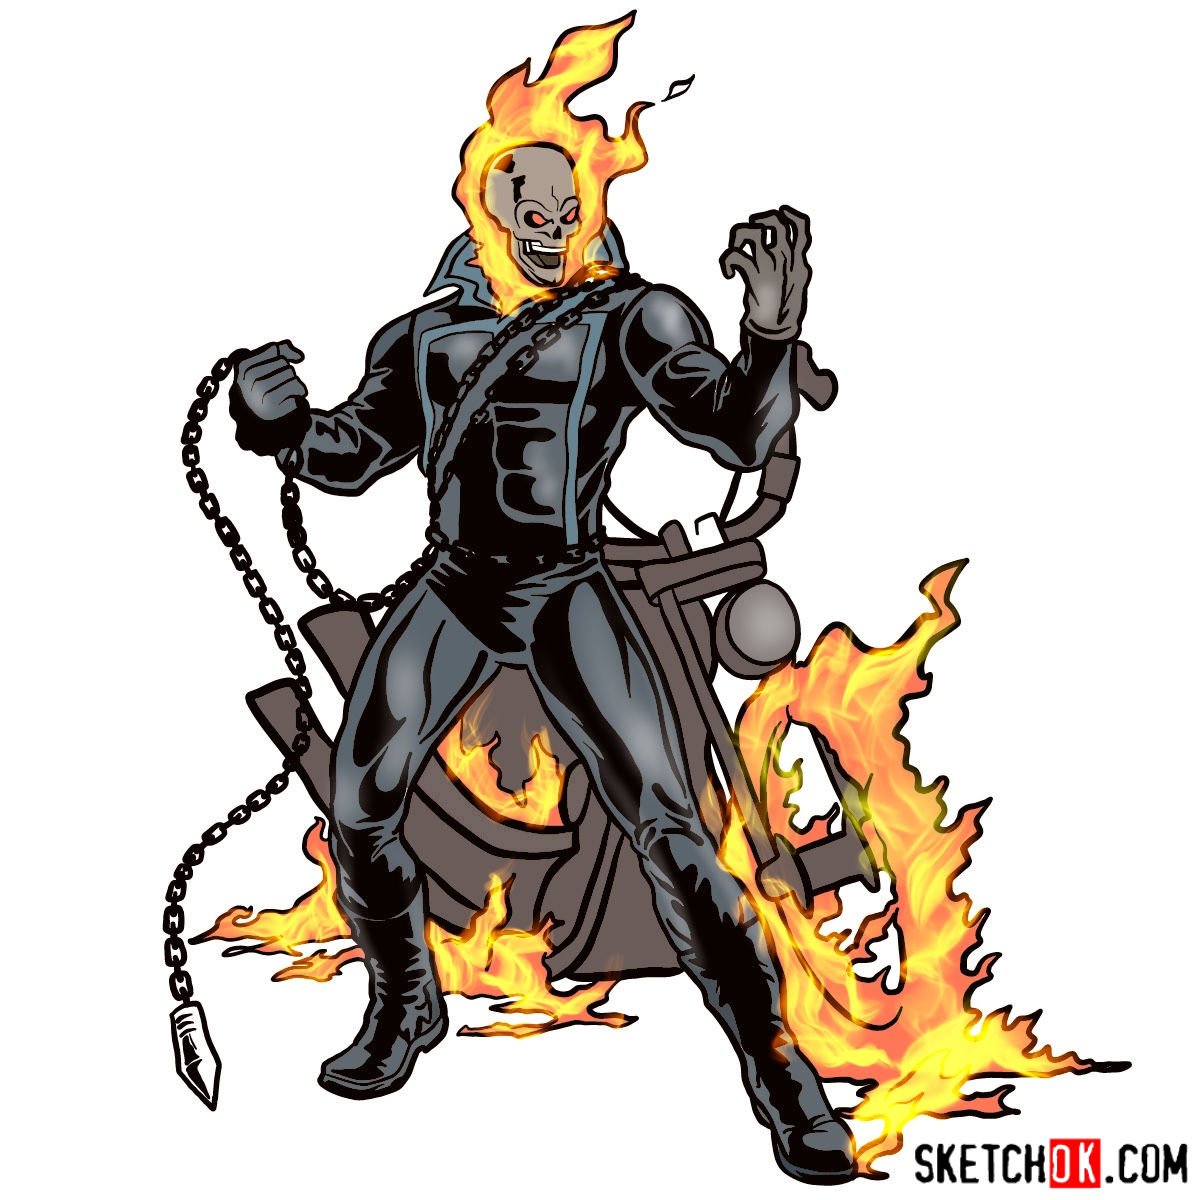 How to draw Ghost Rider with his flaming bike - Sketchok easy drawing guides